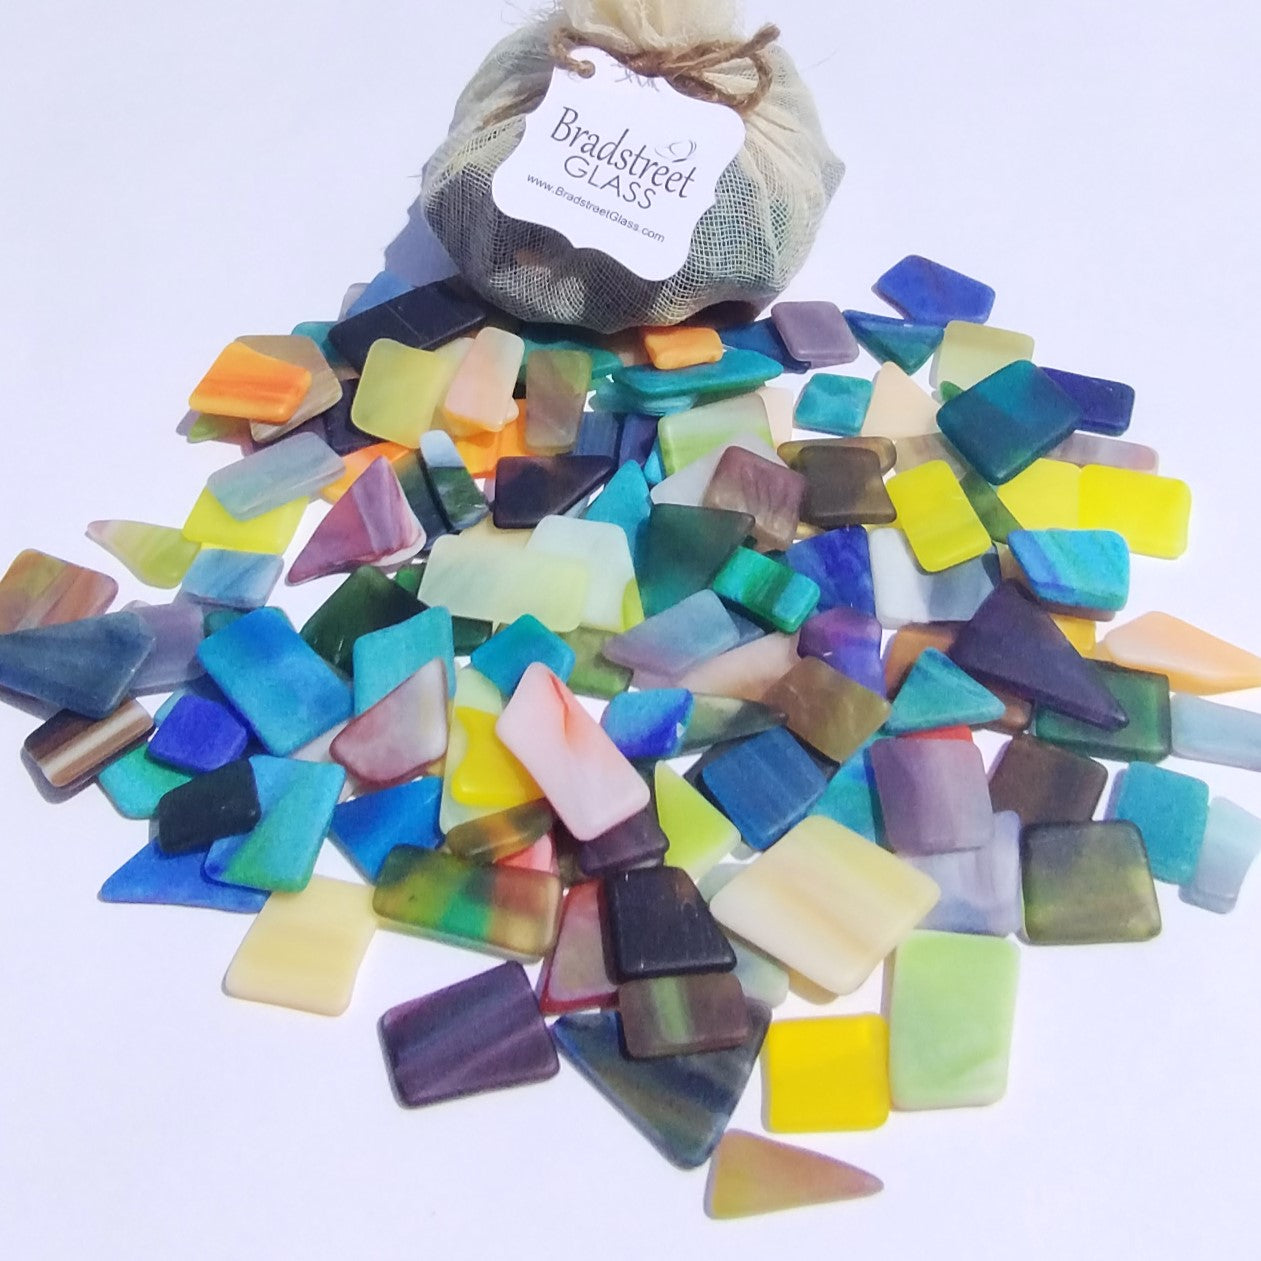 Swirled Mix-Color Tumbled Stained Glass, 1/2 LB "Sea Glass" Pieces in Assorted Swirled Colors